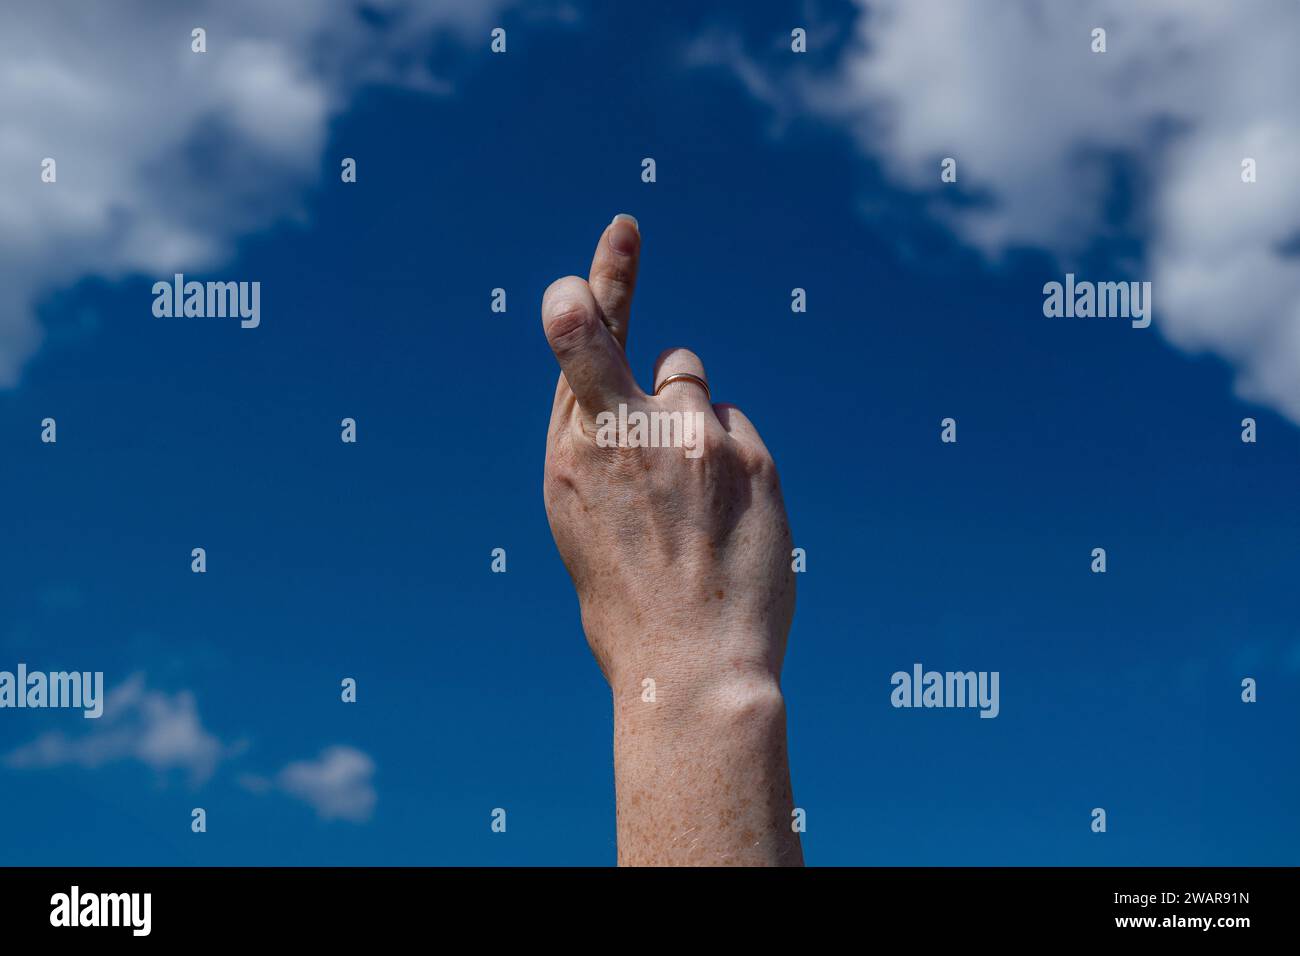 girls hand shows finger cross and symbol on white background Stock Photo